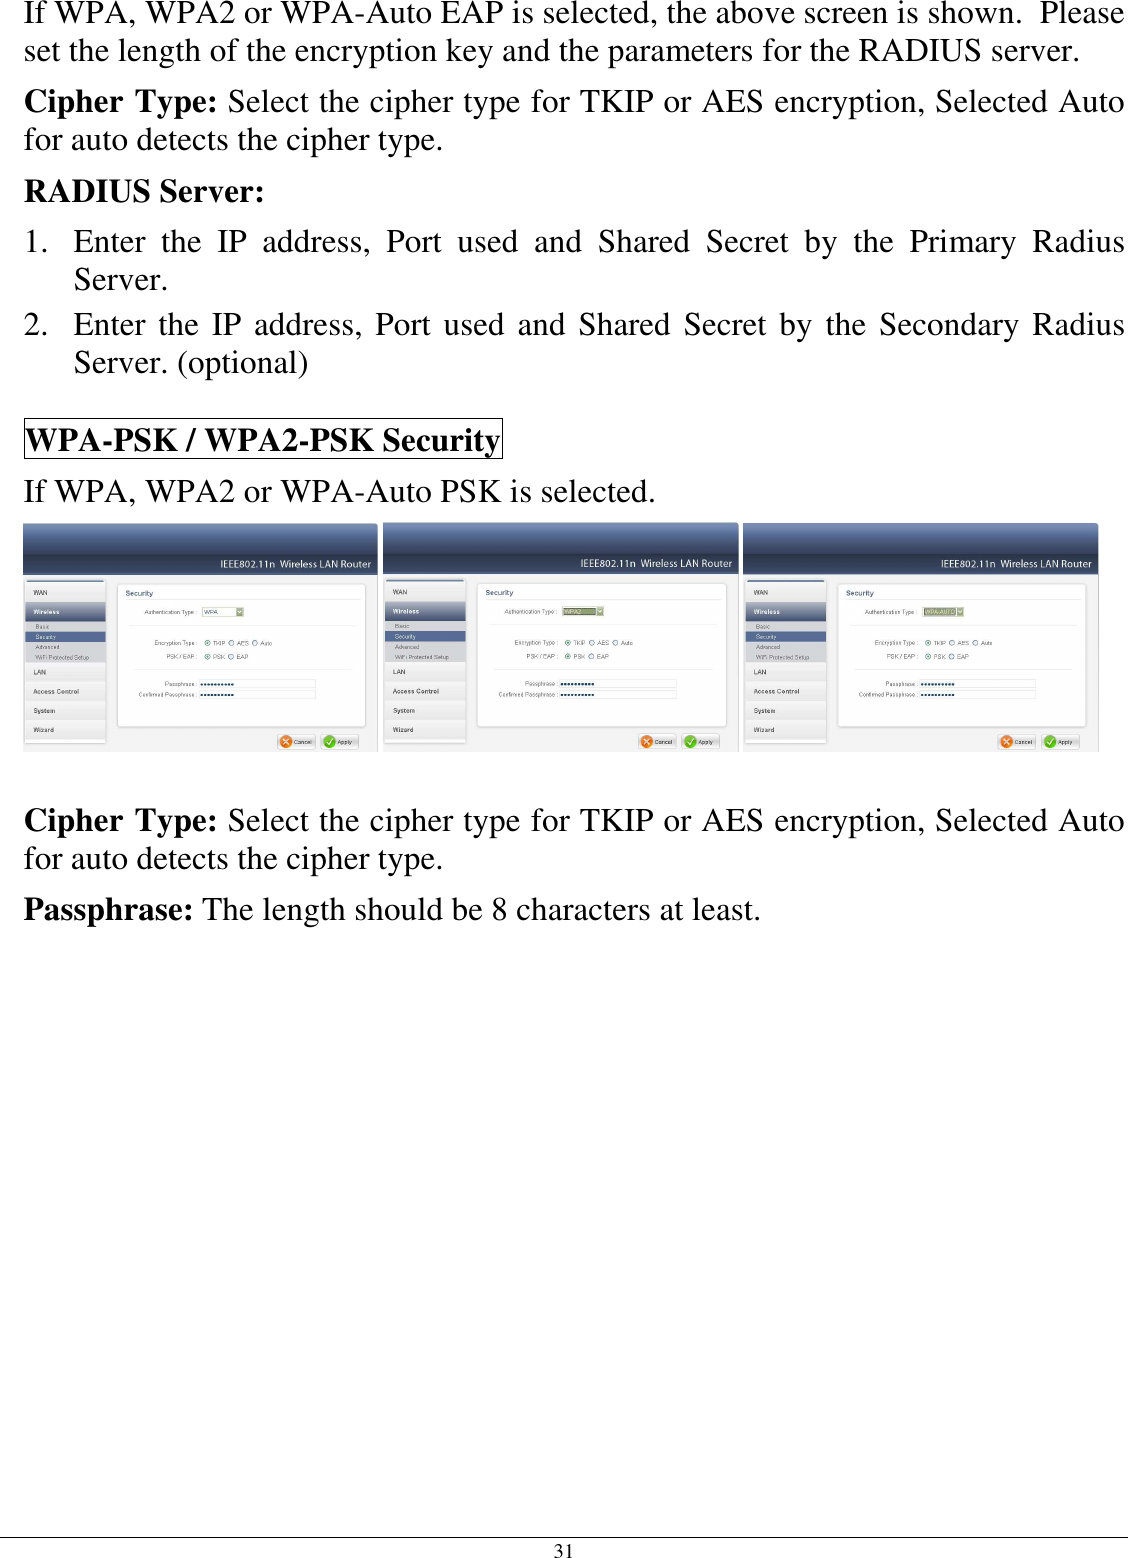 31 If WPA, WPA2 or WPA-Auto EAP is selected, the above screen is shown.  Please set the length of the encryption key and the parameters for the RADIUS server. Cipher Type: Select the cipher type for TKIP or AES encryption, Selected Auto for auto detects the cipher type.  RADIUS Server: 1. Enter  the  IP  address,  Port  used  and  Shared  Secret  by  the  Primary  Radius Server. 2. Enter the IP address, Port used and Shared Secret by  the Secondary Radius Server. (optional) WPA-PSK / WPA2-PSK Security If WPA, WPA2 or WPA-Auto PSK is selected.     Cipher Type: Select the cipher type for TKIP or AES encryption, Selected Auto for auto detects the cipher type.  Passphrase: The length should be 8 characters at least.   